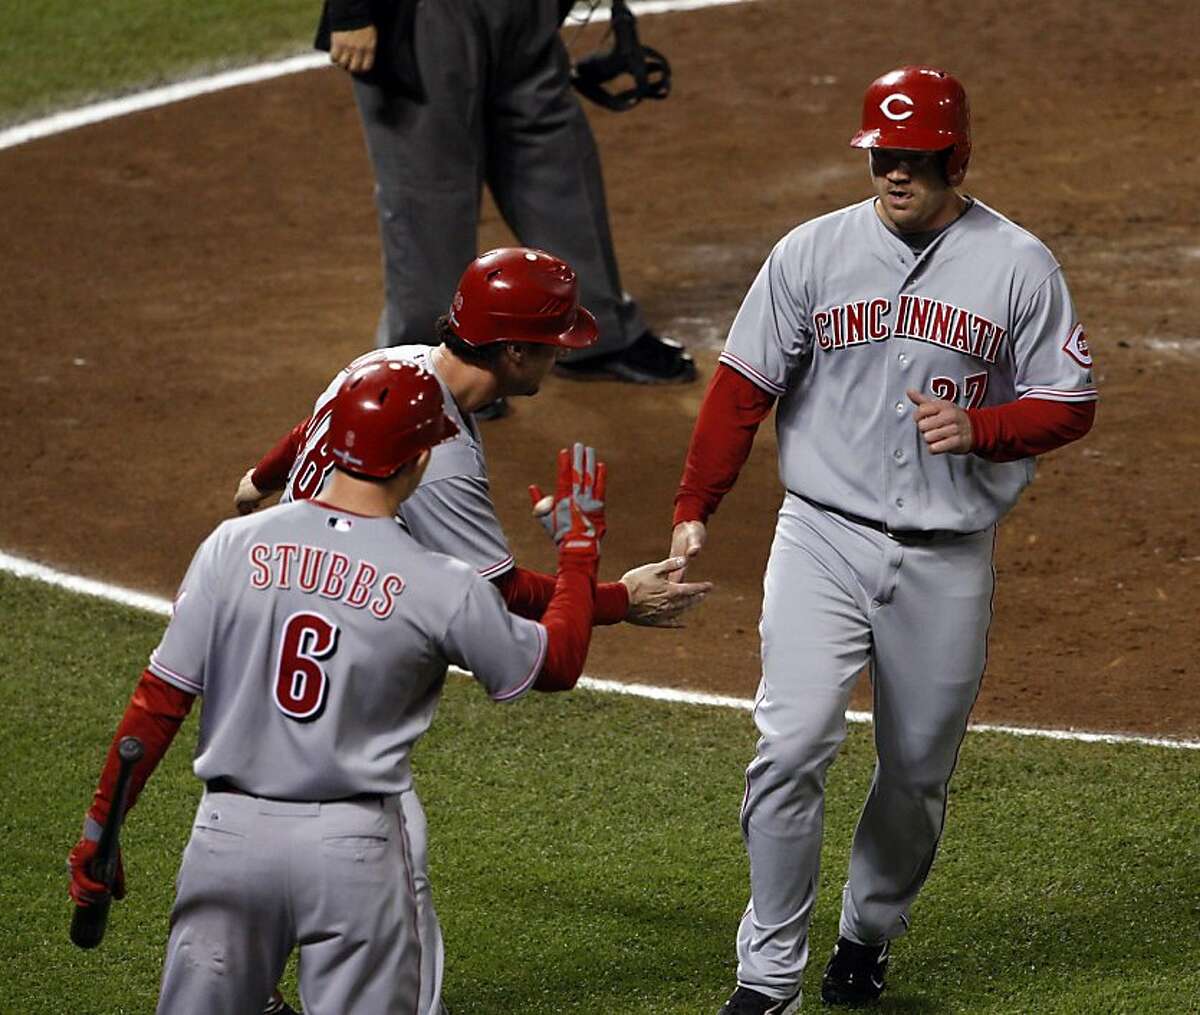 Giants lose to Reds 9-0, down 0-2 in NLDS